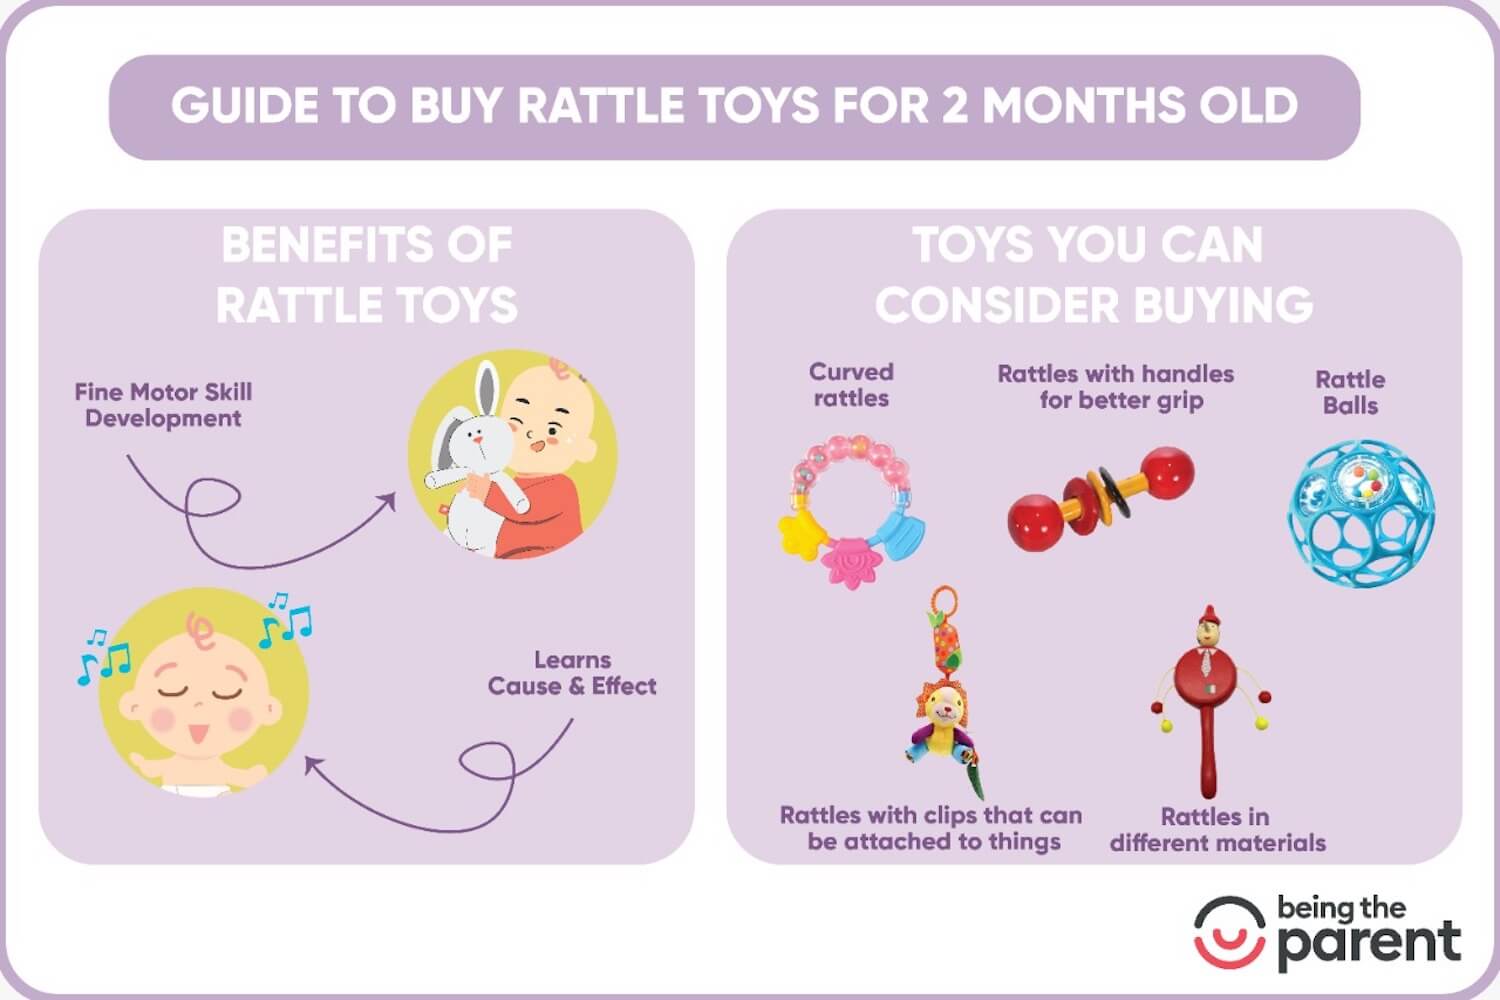 Rattle toys for 2 month old